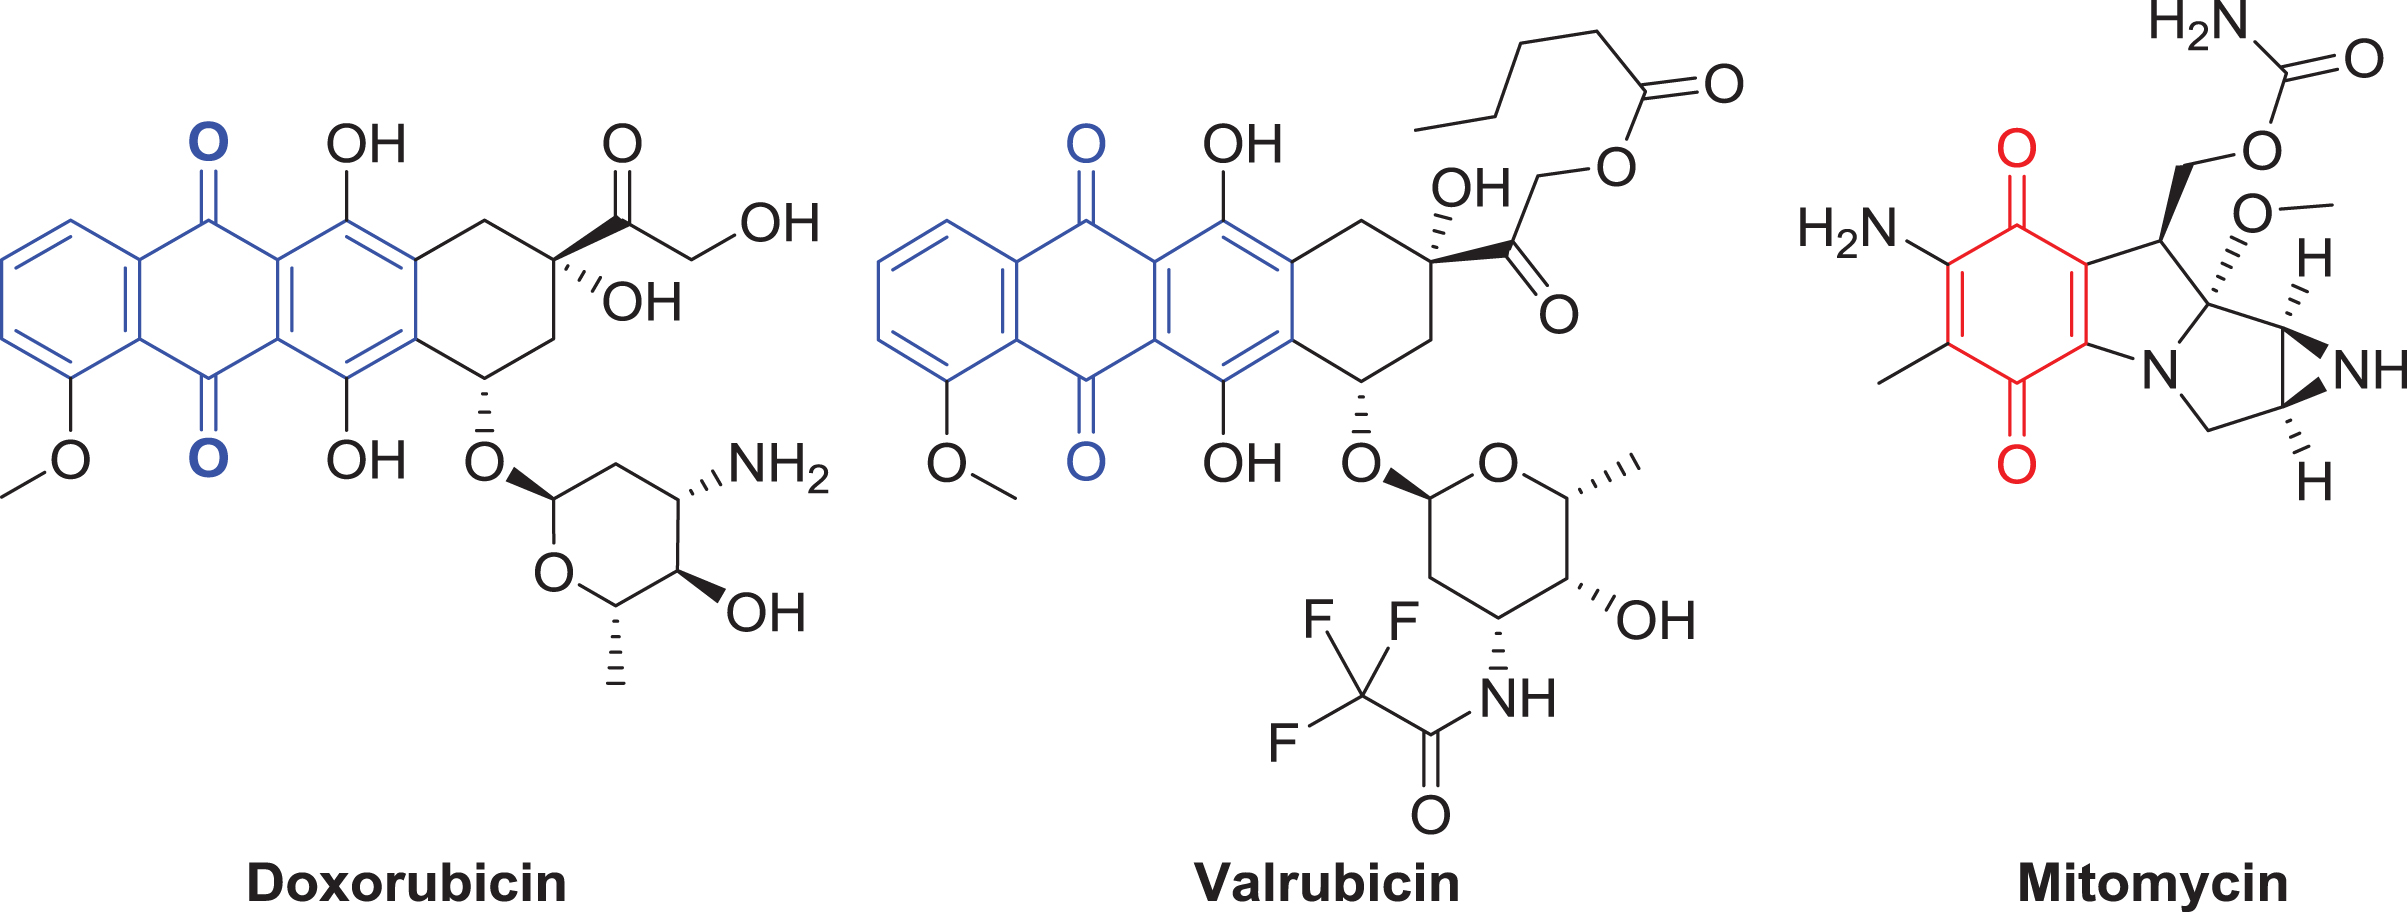 Examples of current chemotherapeutics that contain anthraquinone (3-ring system) and quinone (the basic functional group of a single conjugated cyclic dione) moieties are illustrated above and are highlighted with dashed bond lines. The structures of doxorubicin, valrubicin, and mitomycin are shown.